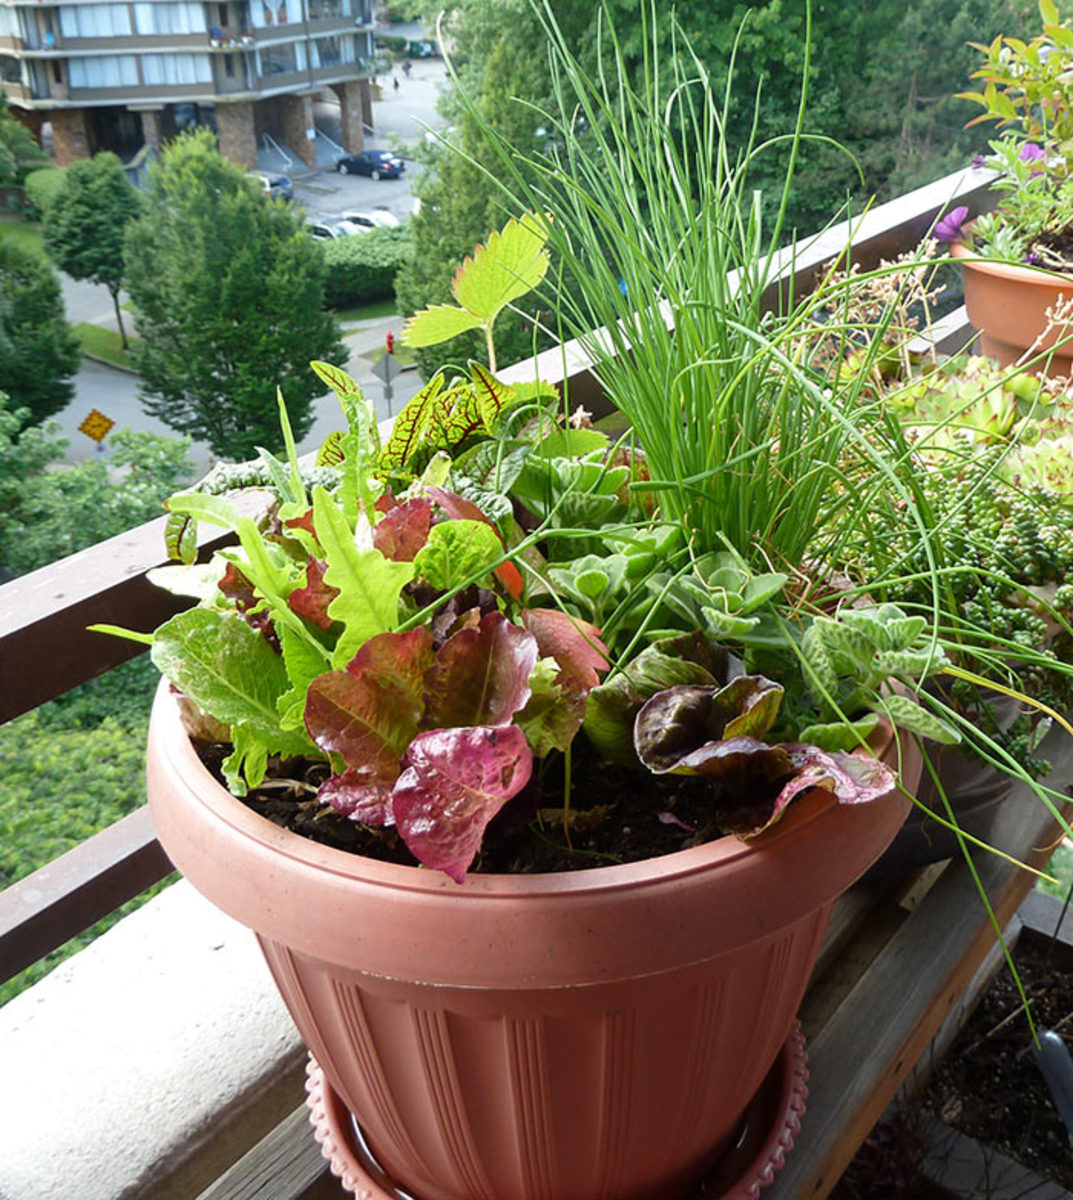 A mixture of different kinds of lettuce grow with chives in a balcony pot.